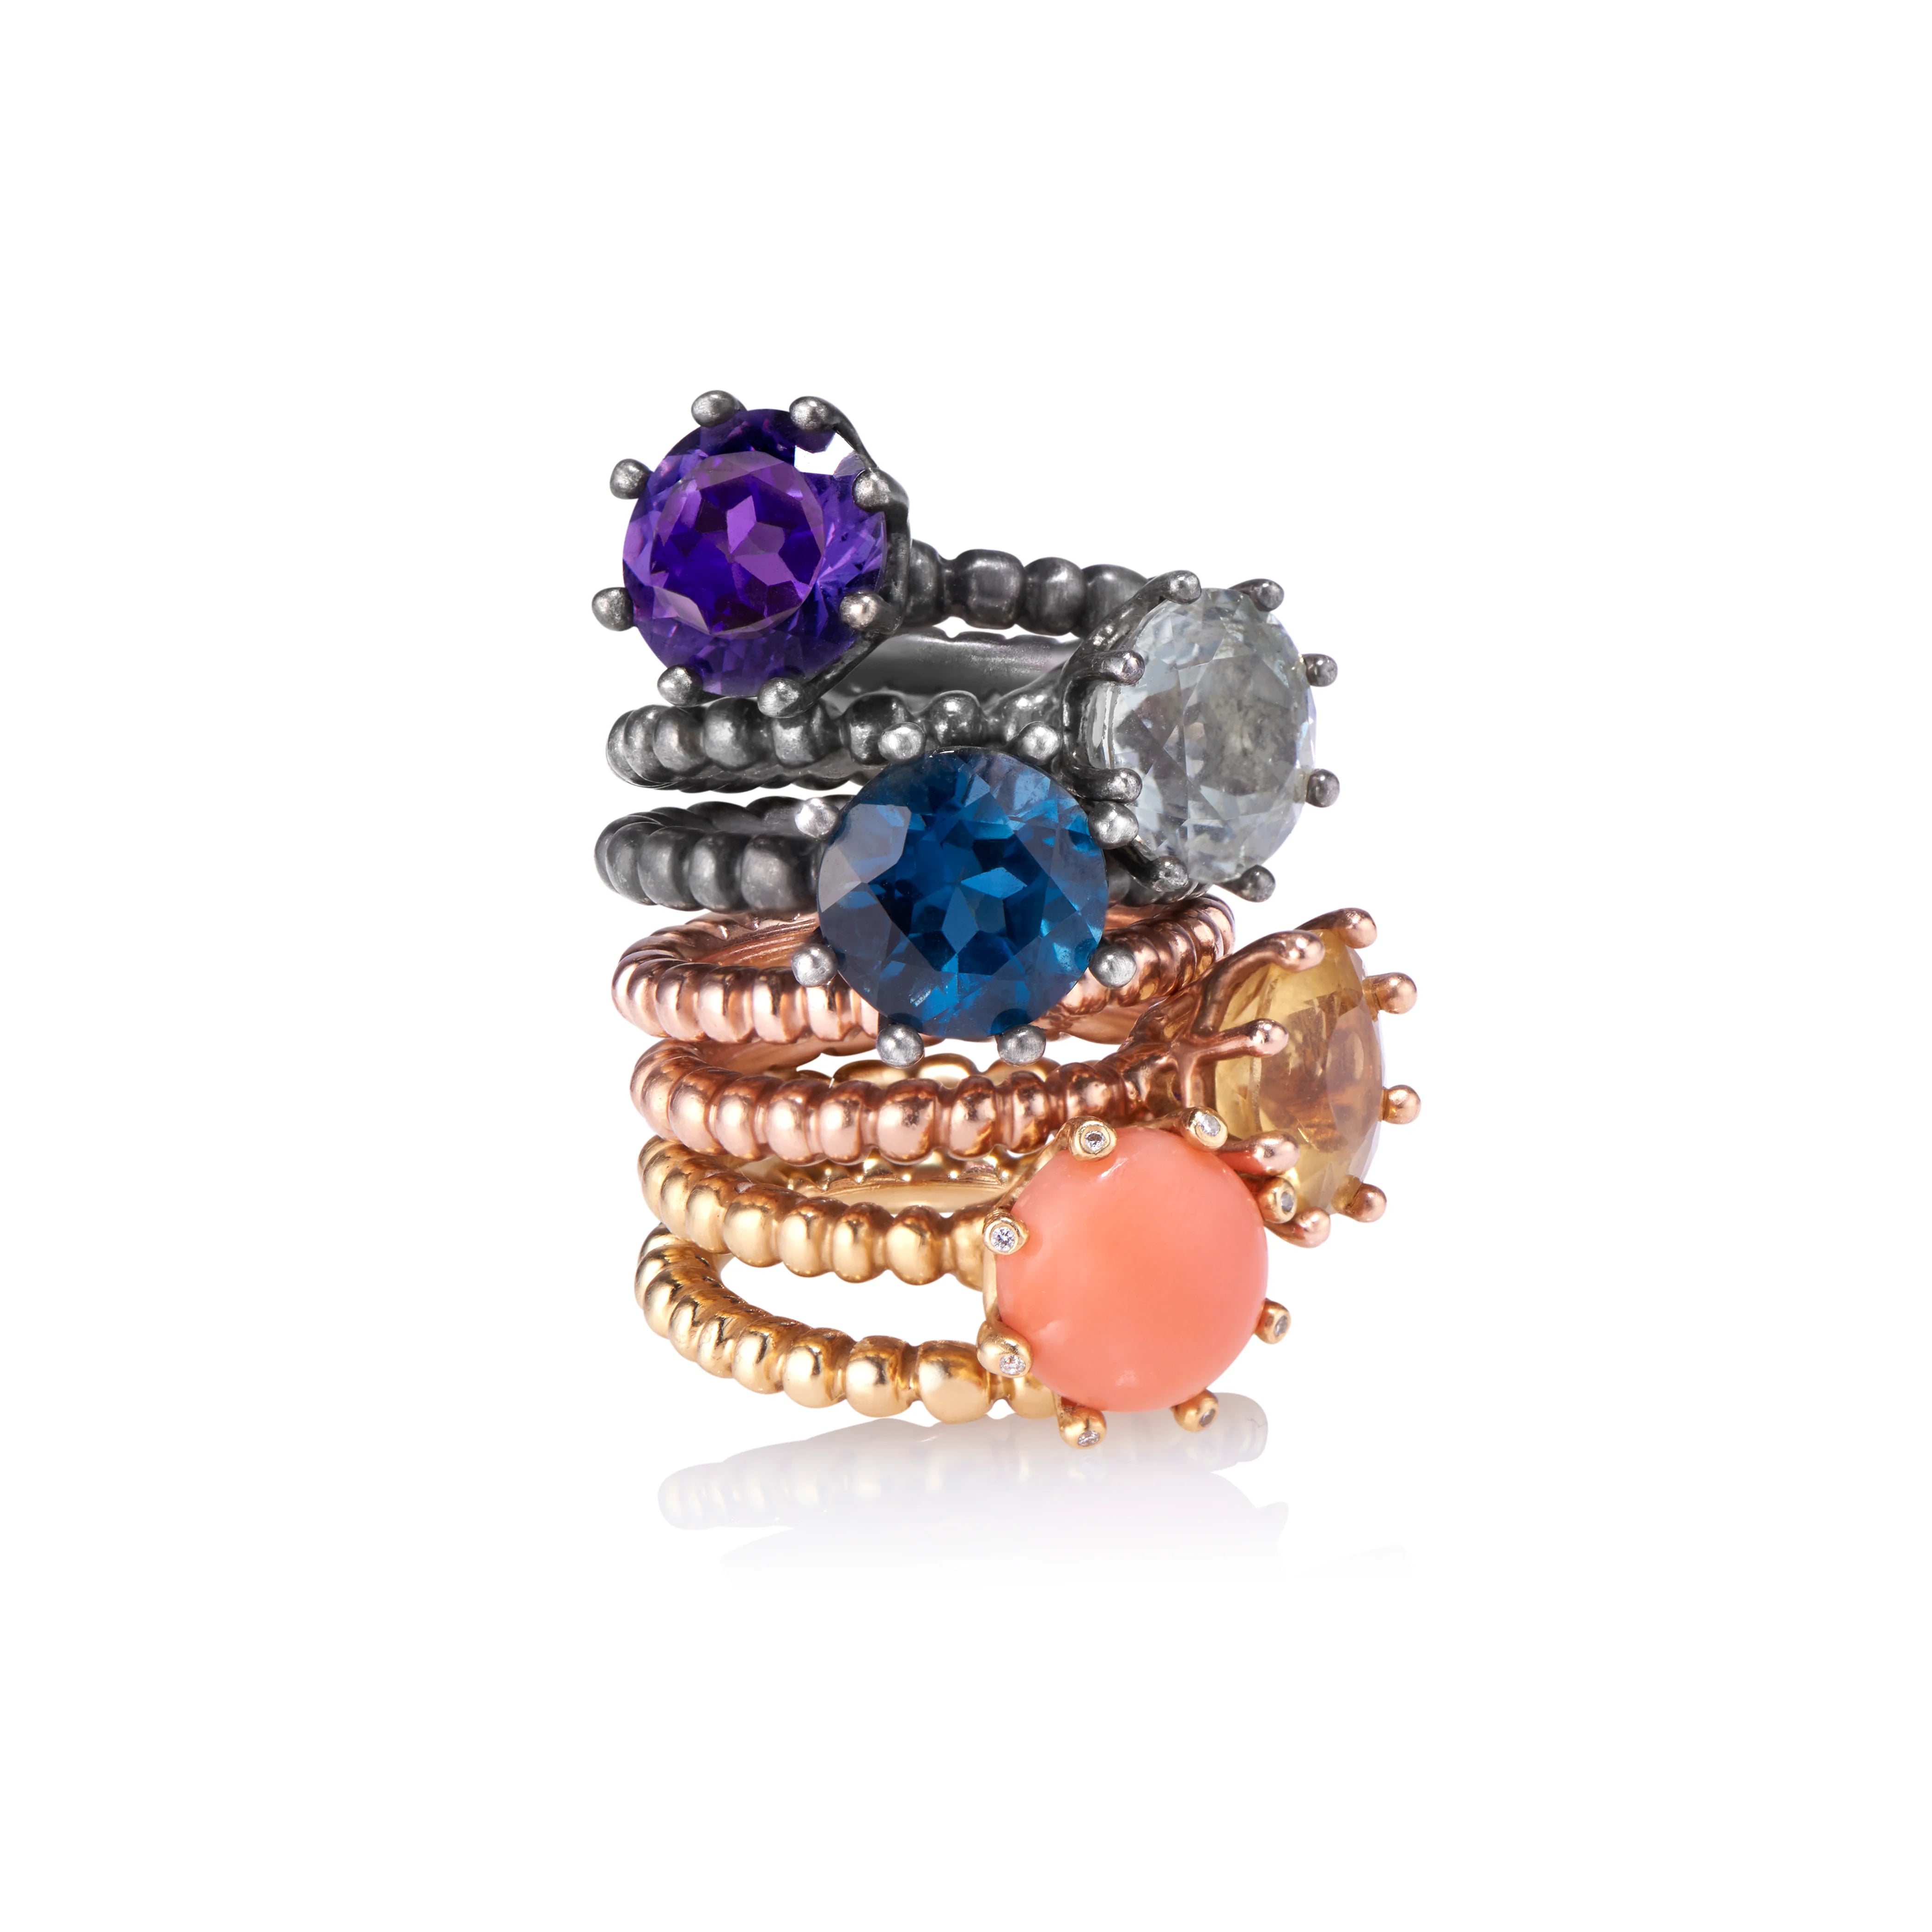 Light Amethyst Crown Ring - Nataly Aponte